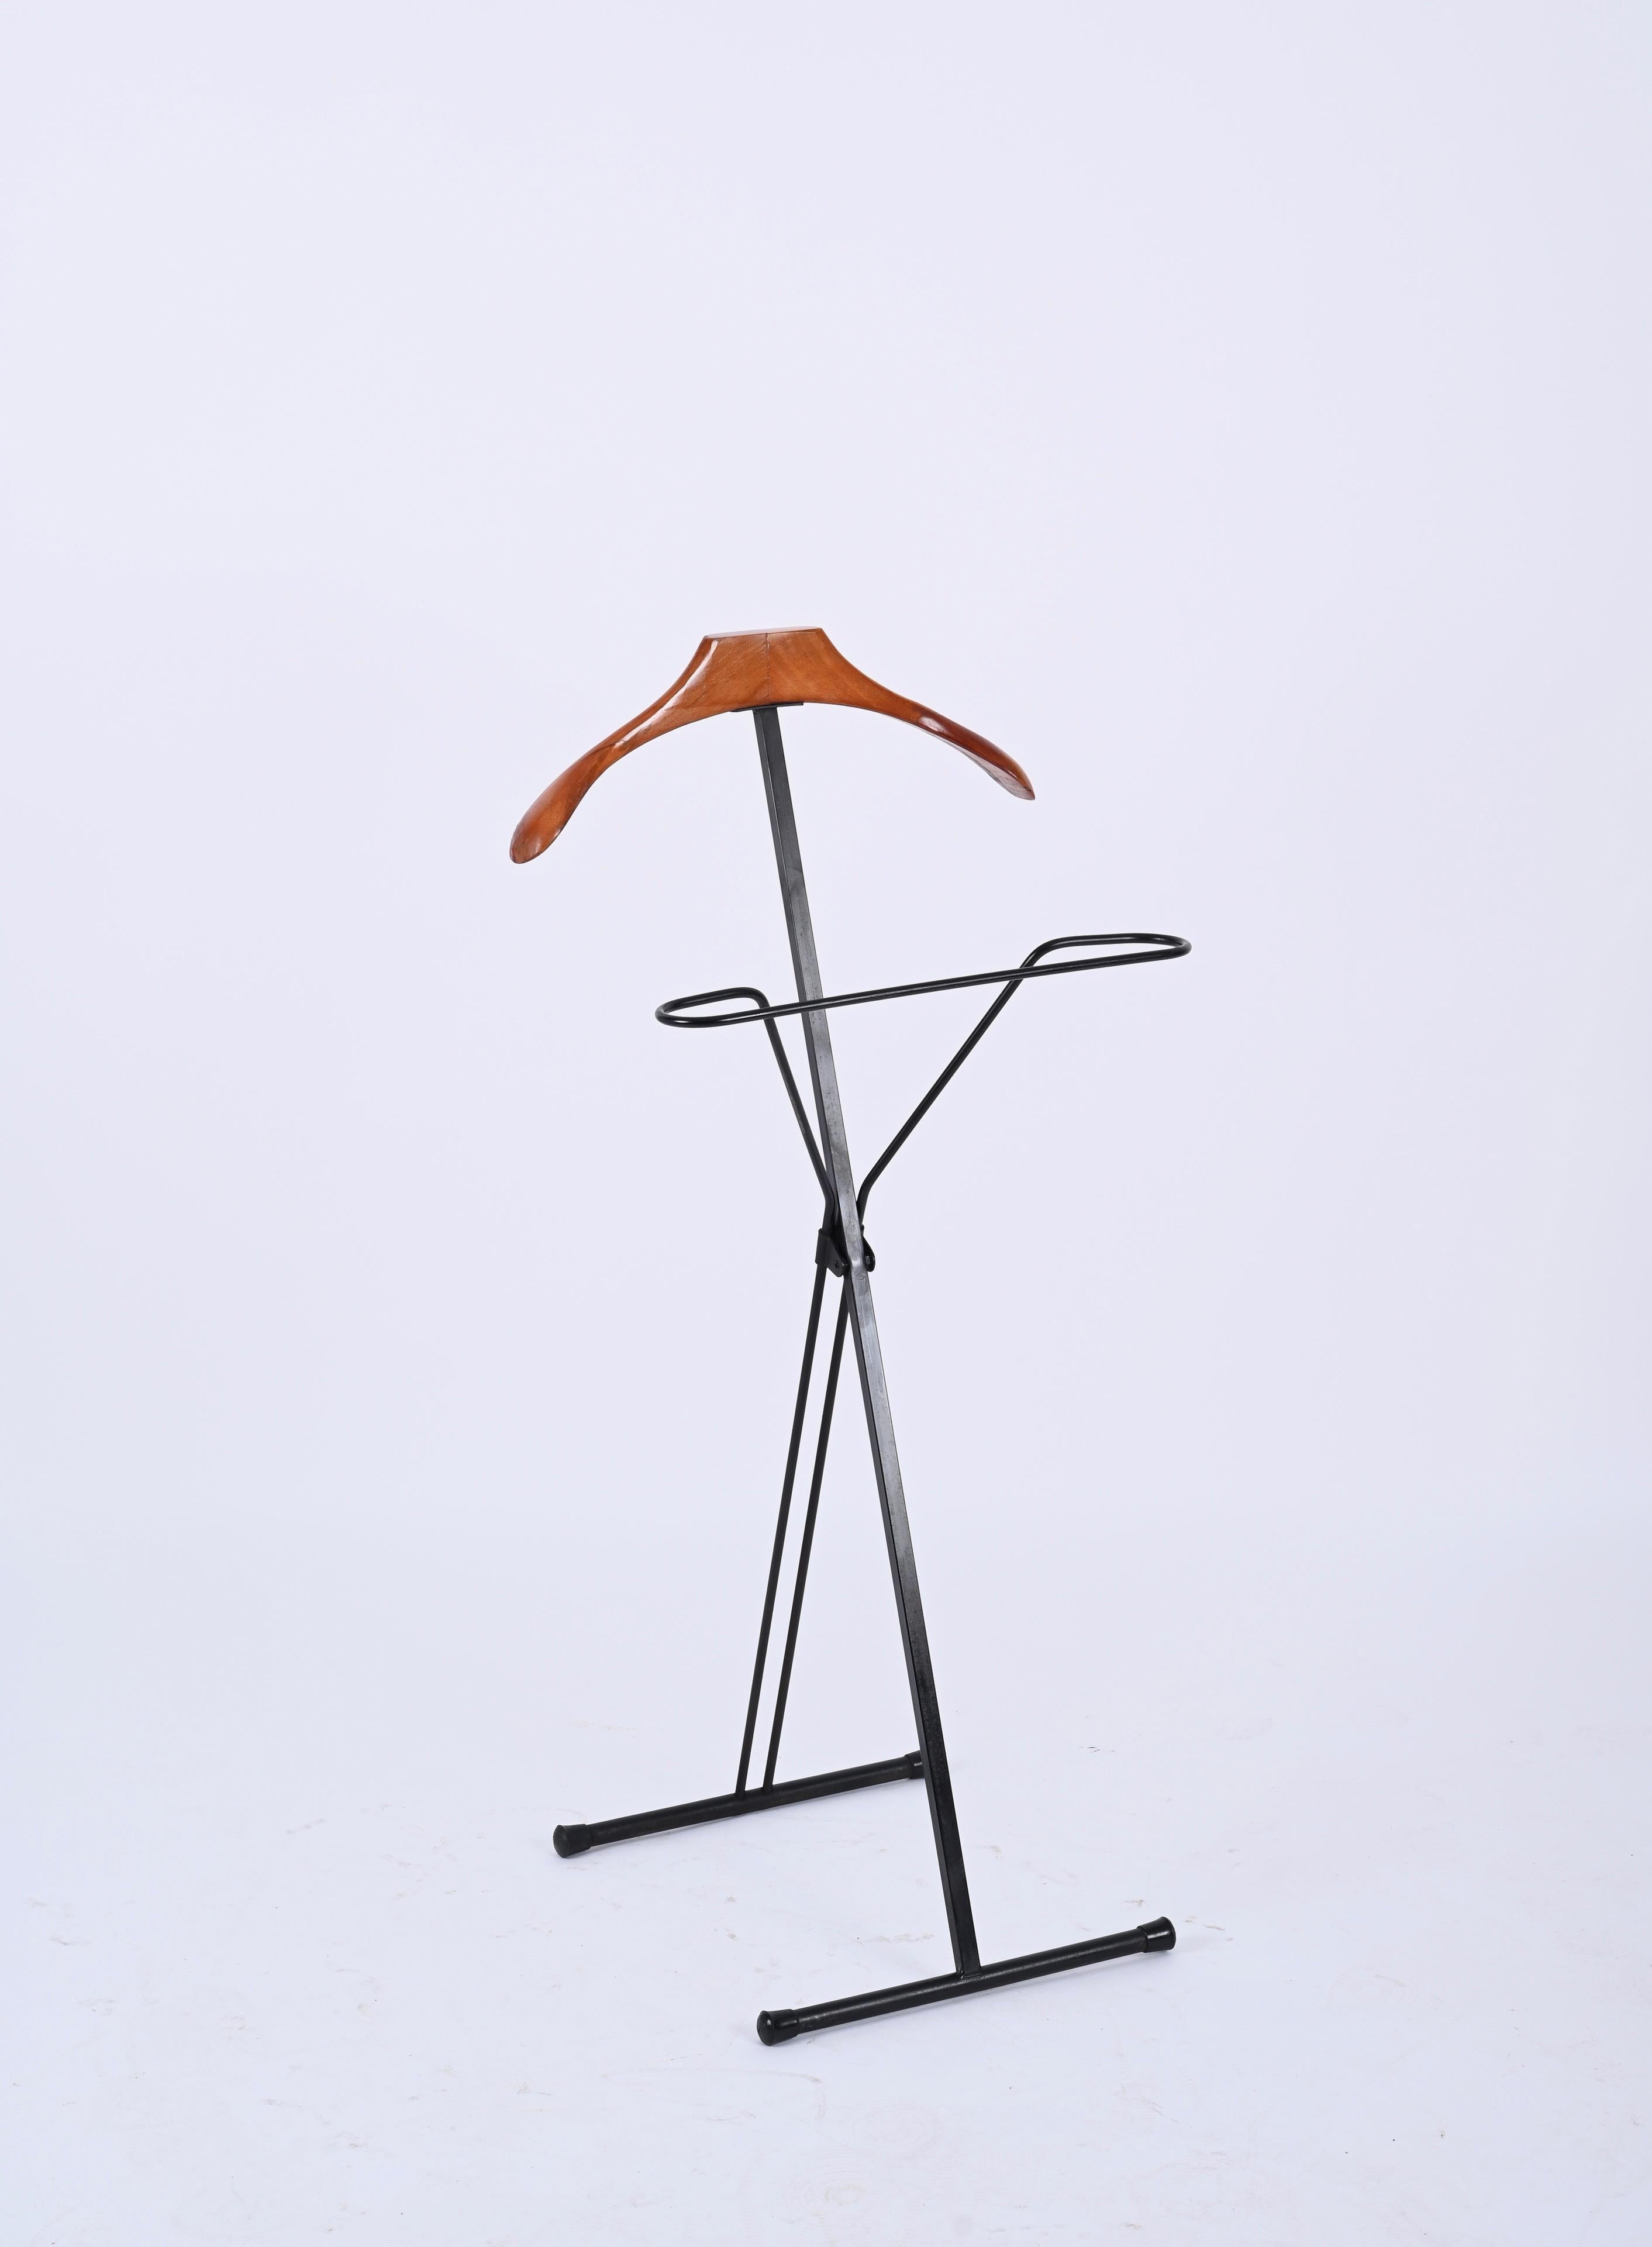 Beautiful and rare midcentury Italian personal coat hanger in an understated modern style. This fantastic item was made in Italy in the 1960s and is fully collapsible.

This original piece is both functional and highly decorative with the tubular